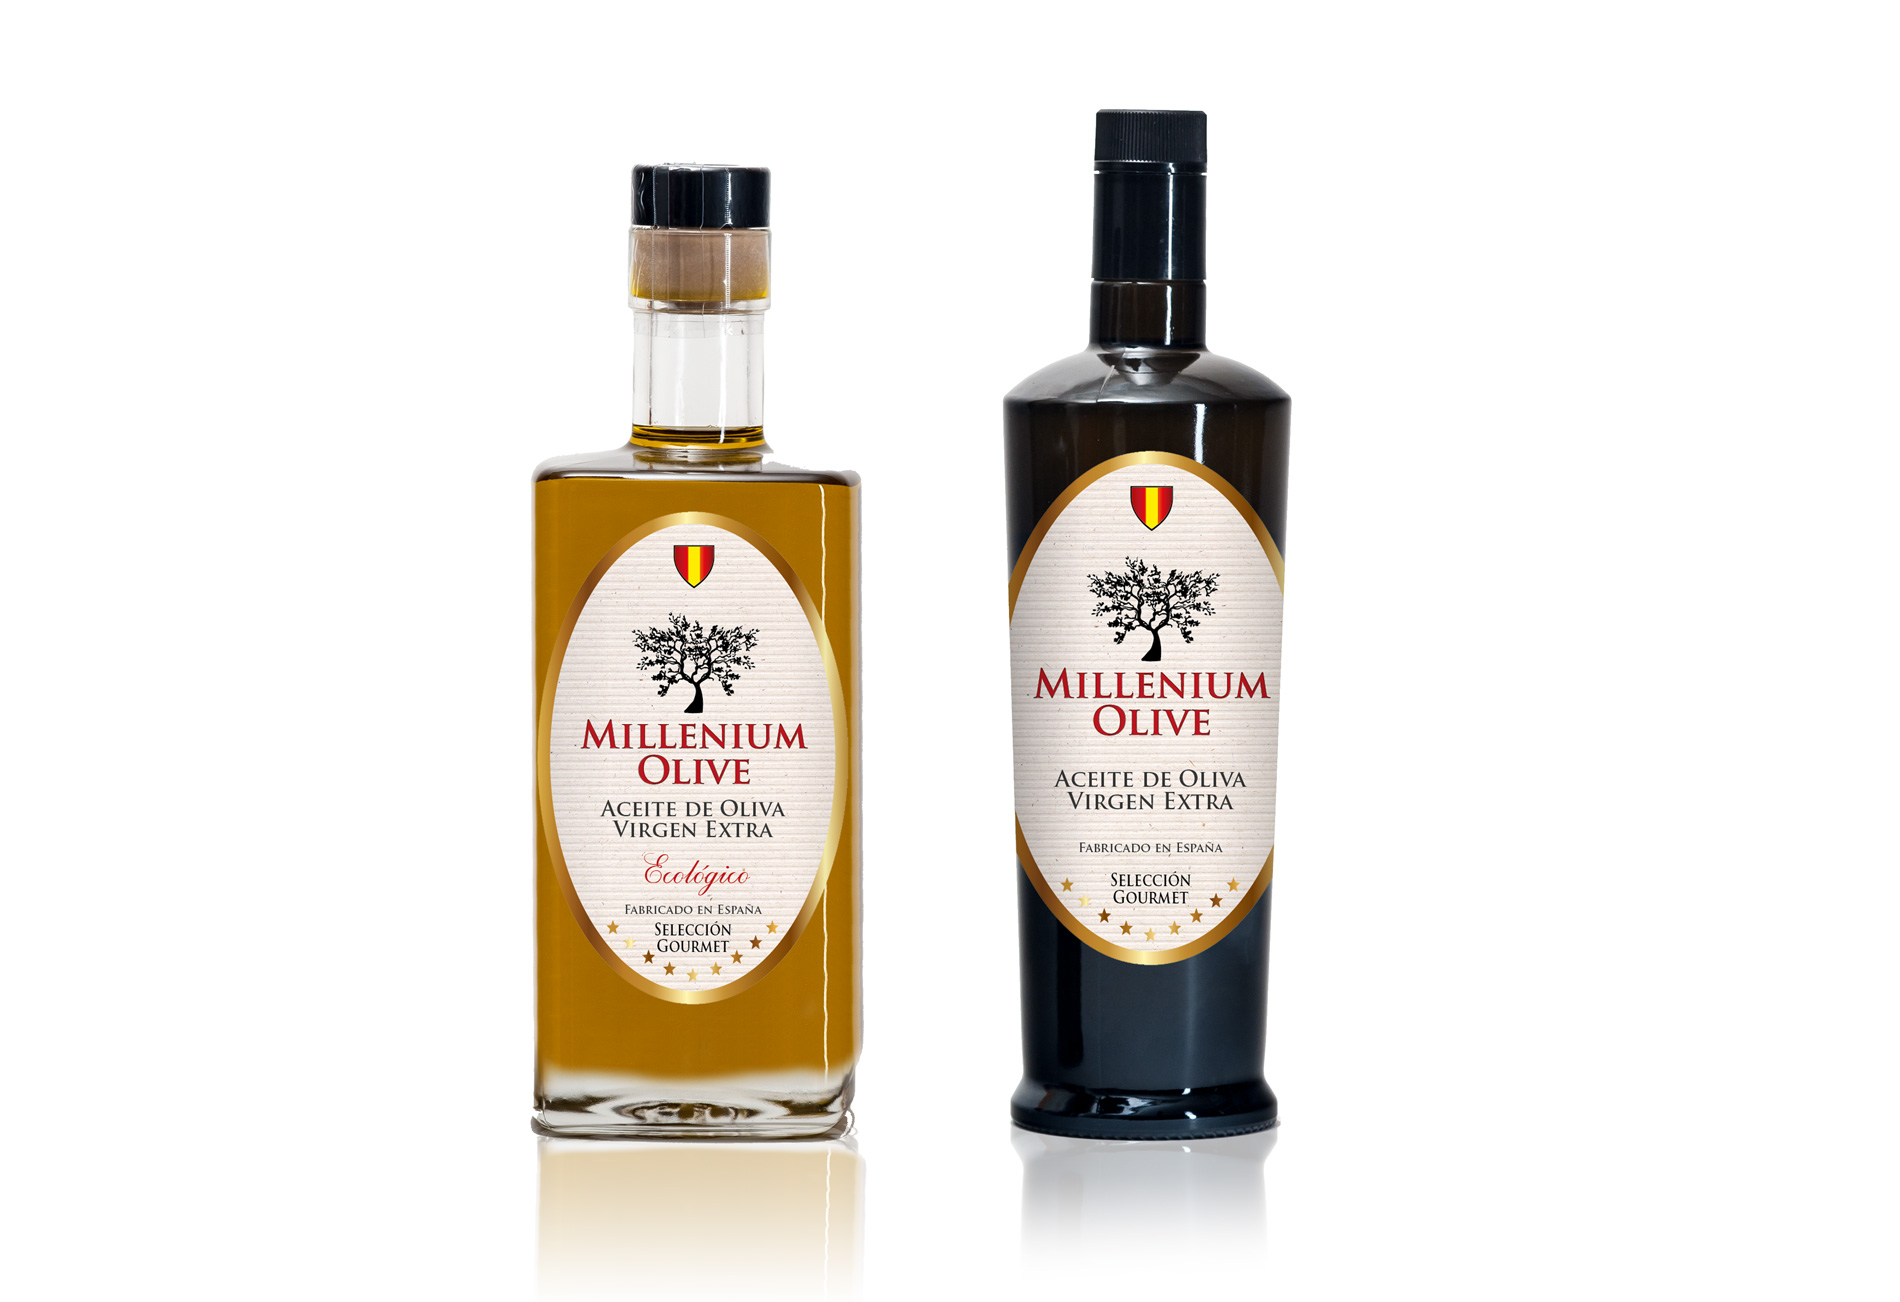 Portfolio of graphic and creative design works of extra virgin olive oil label design and gourmet packaging